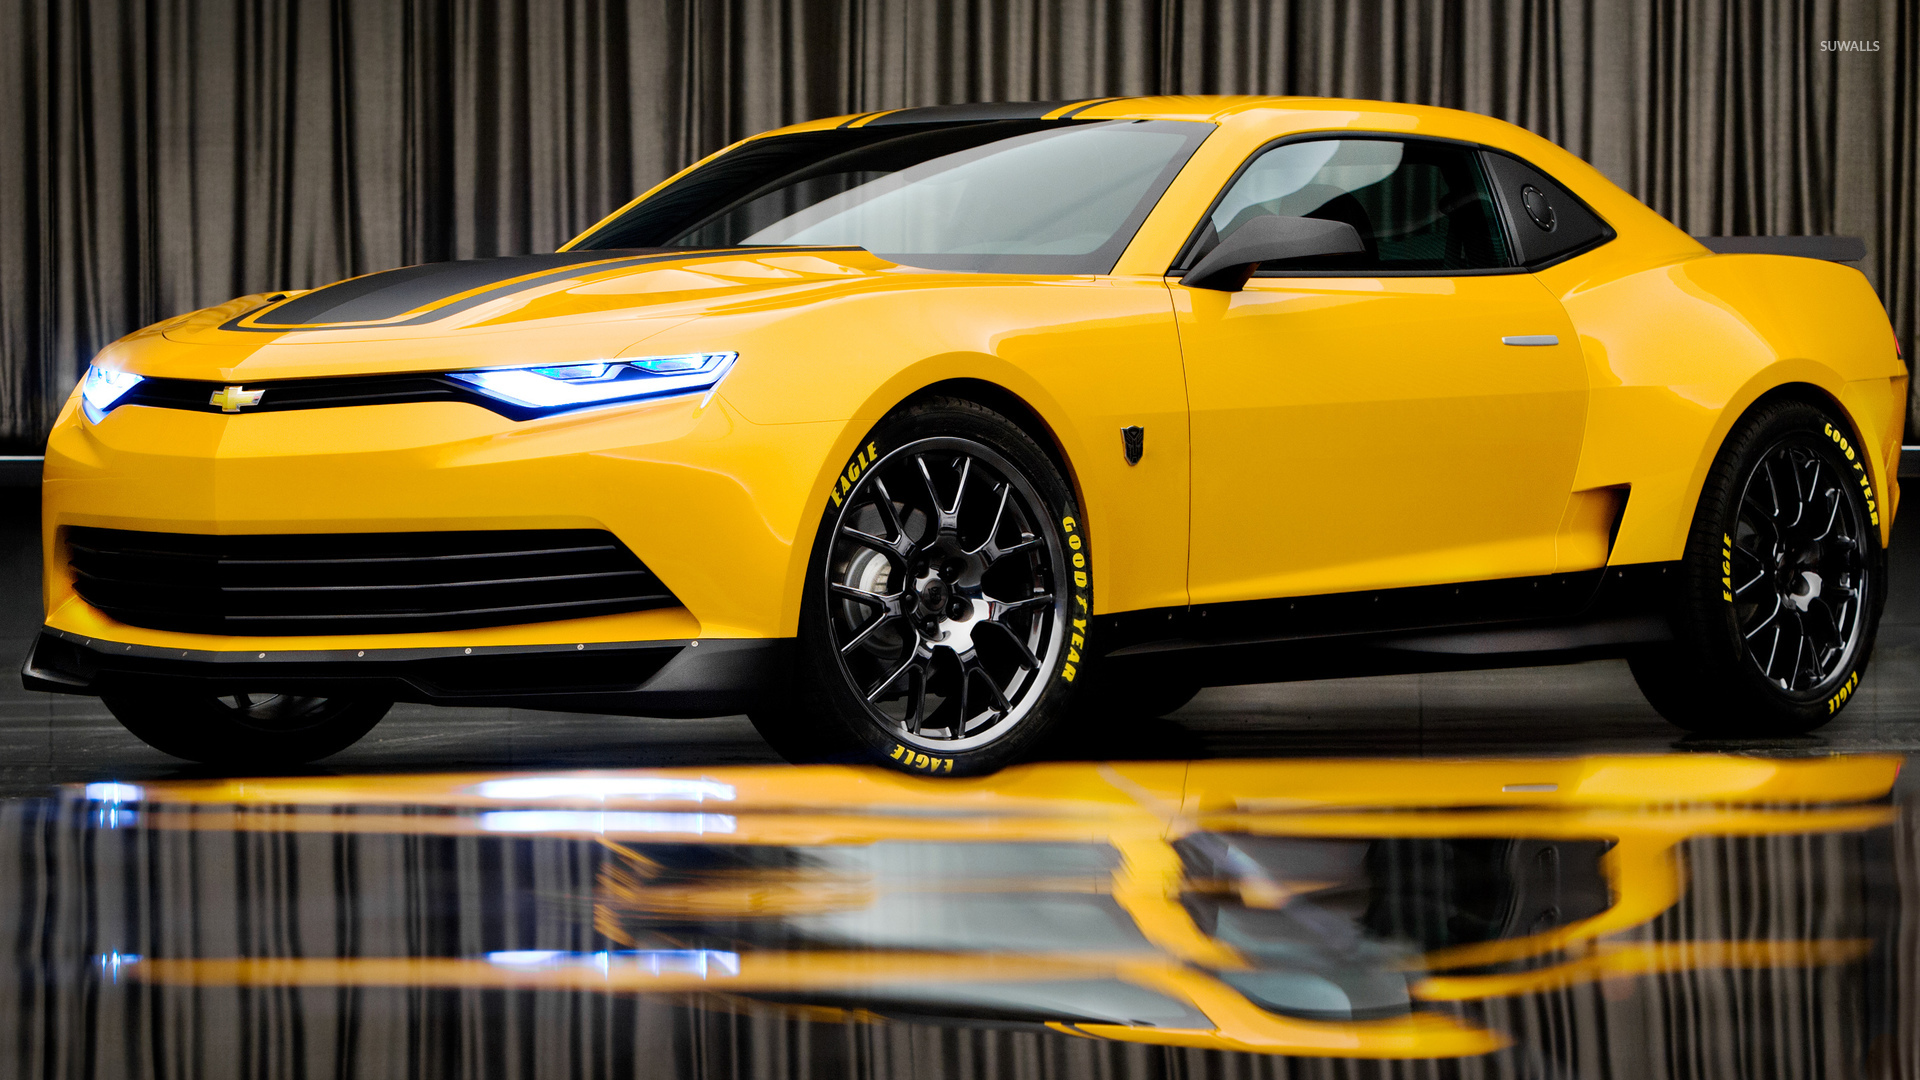 Yellow Chevrolet Camaro with headlights on wallpaper Car wallpapers 54528